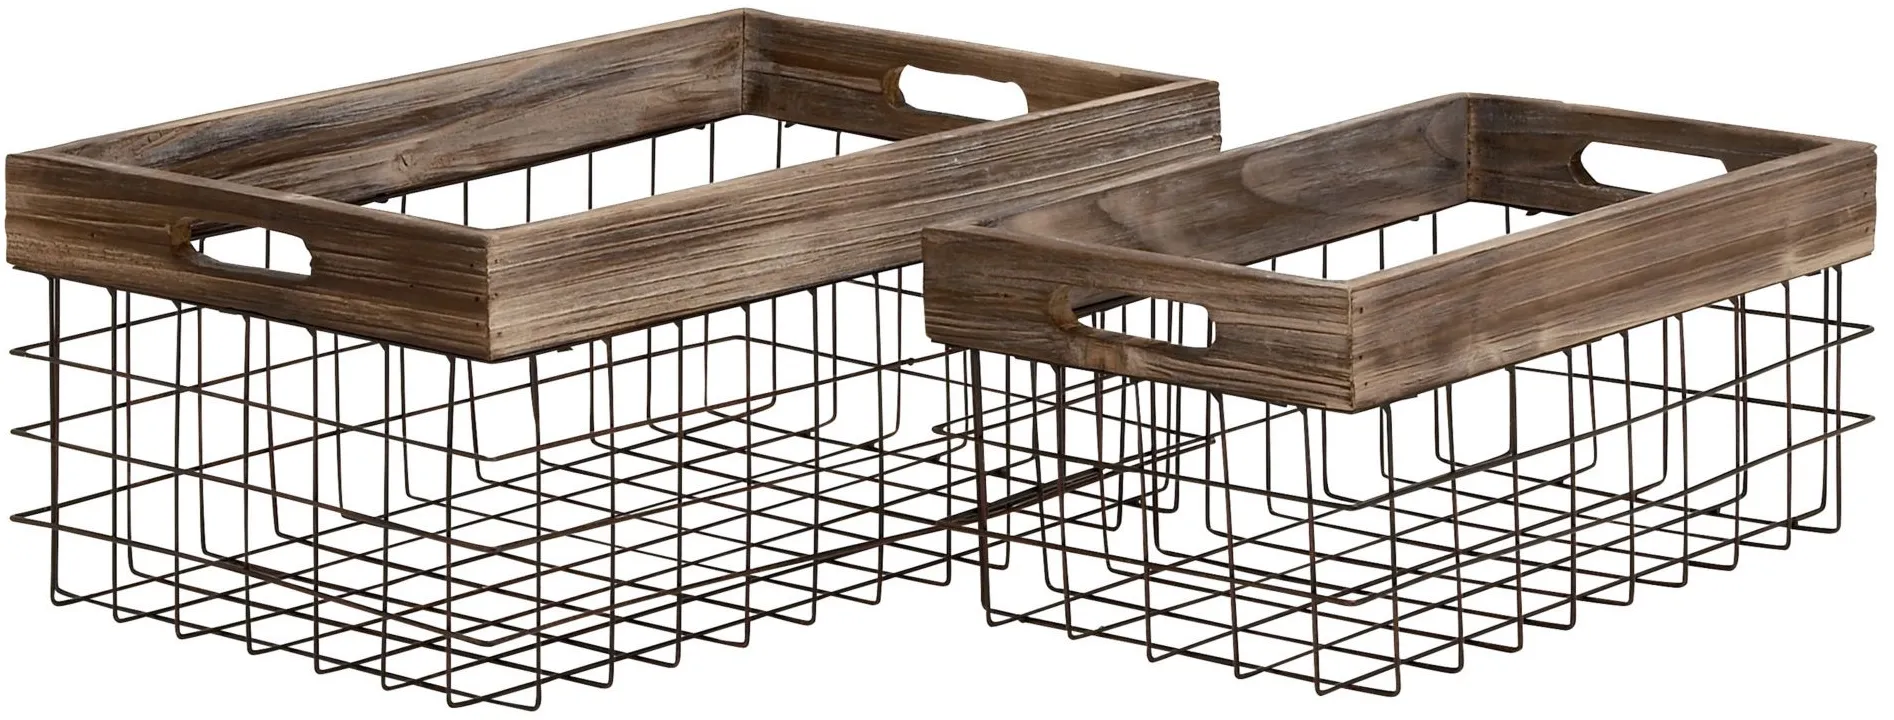 Ivy Collection Set of 2 Metal and Wood Farmhouse Baskets in Black by UMA Enterprises